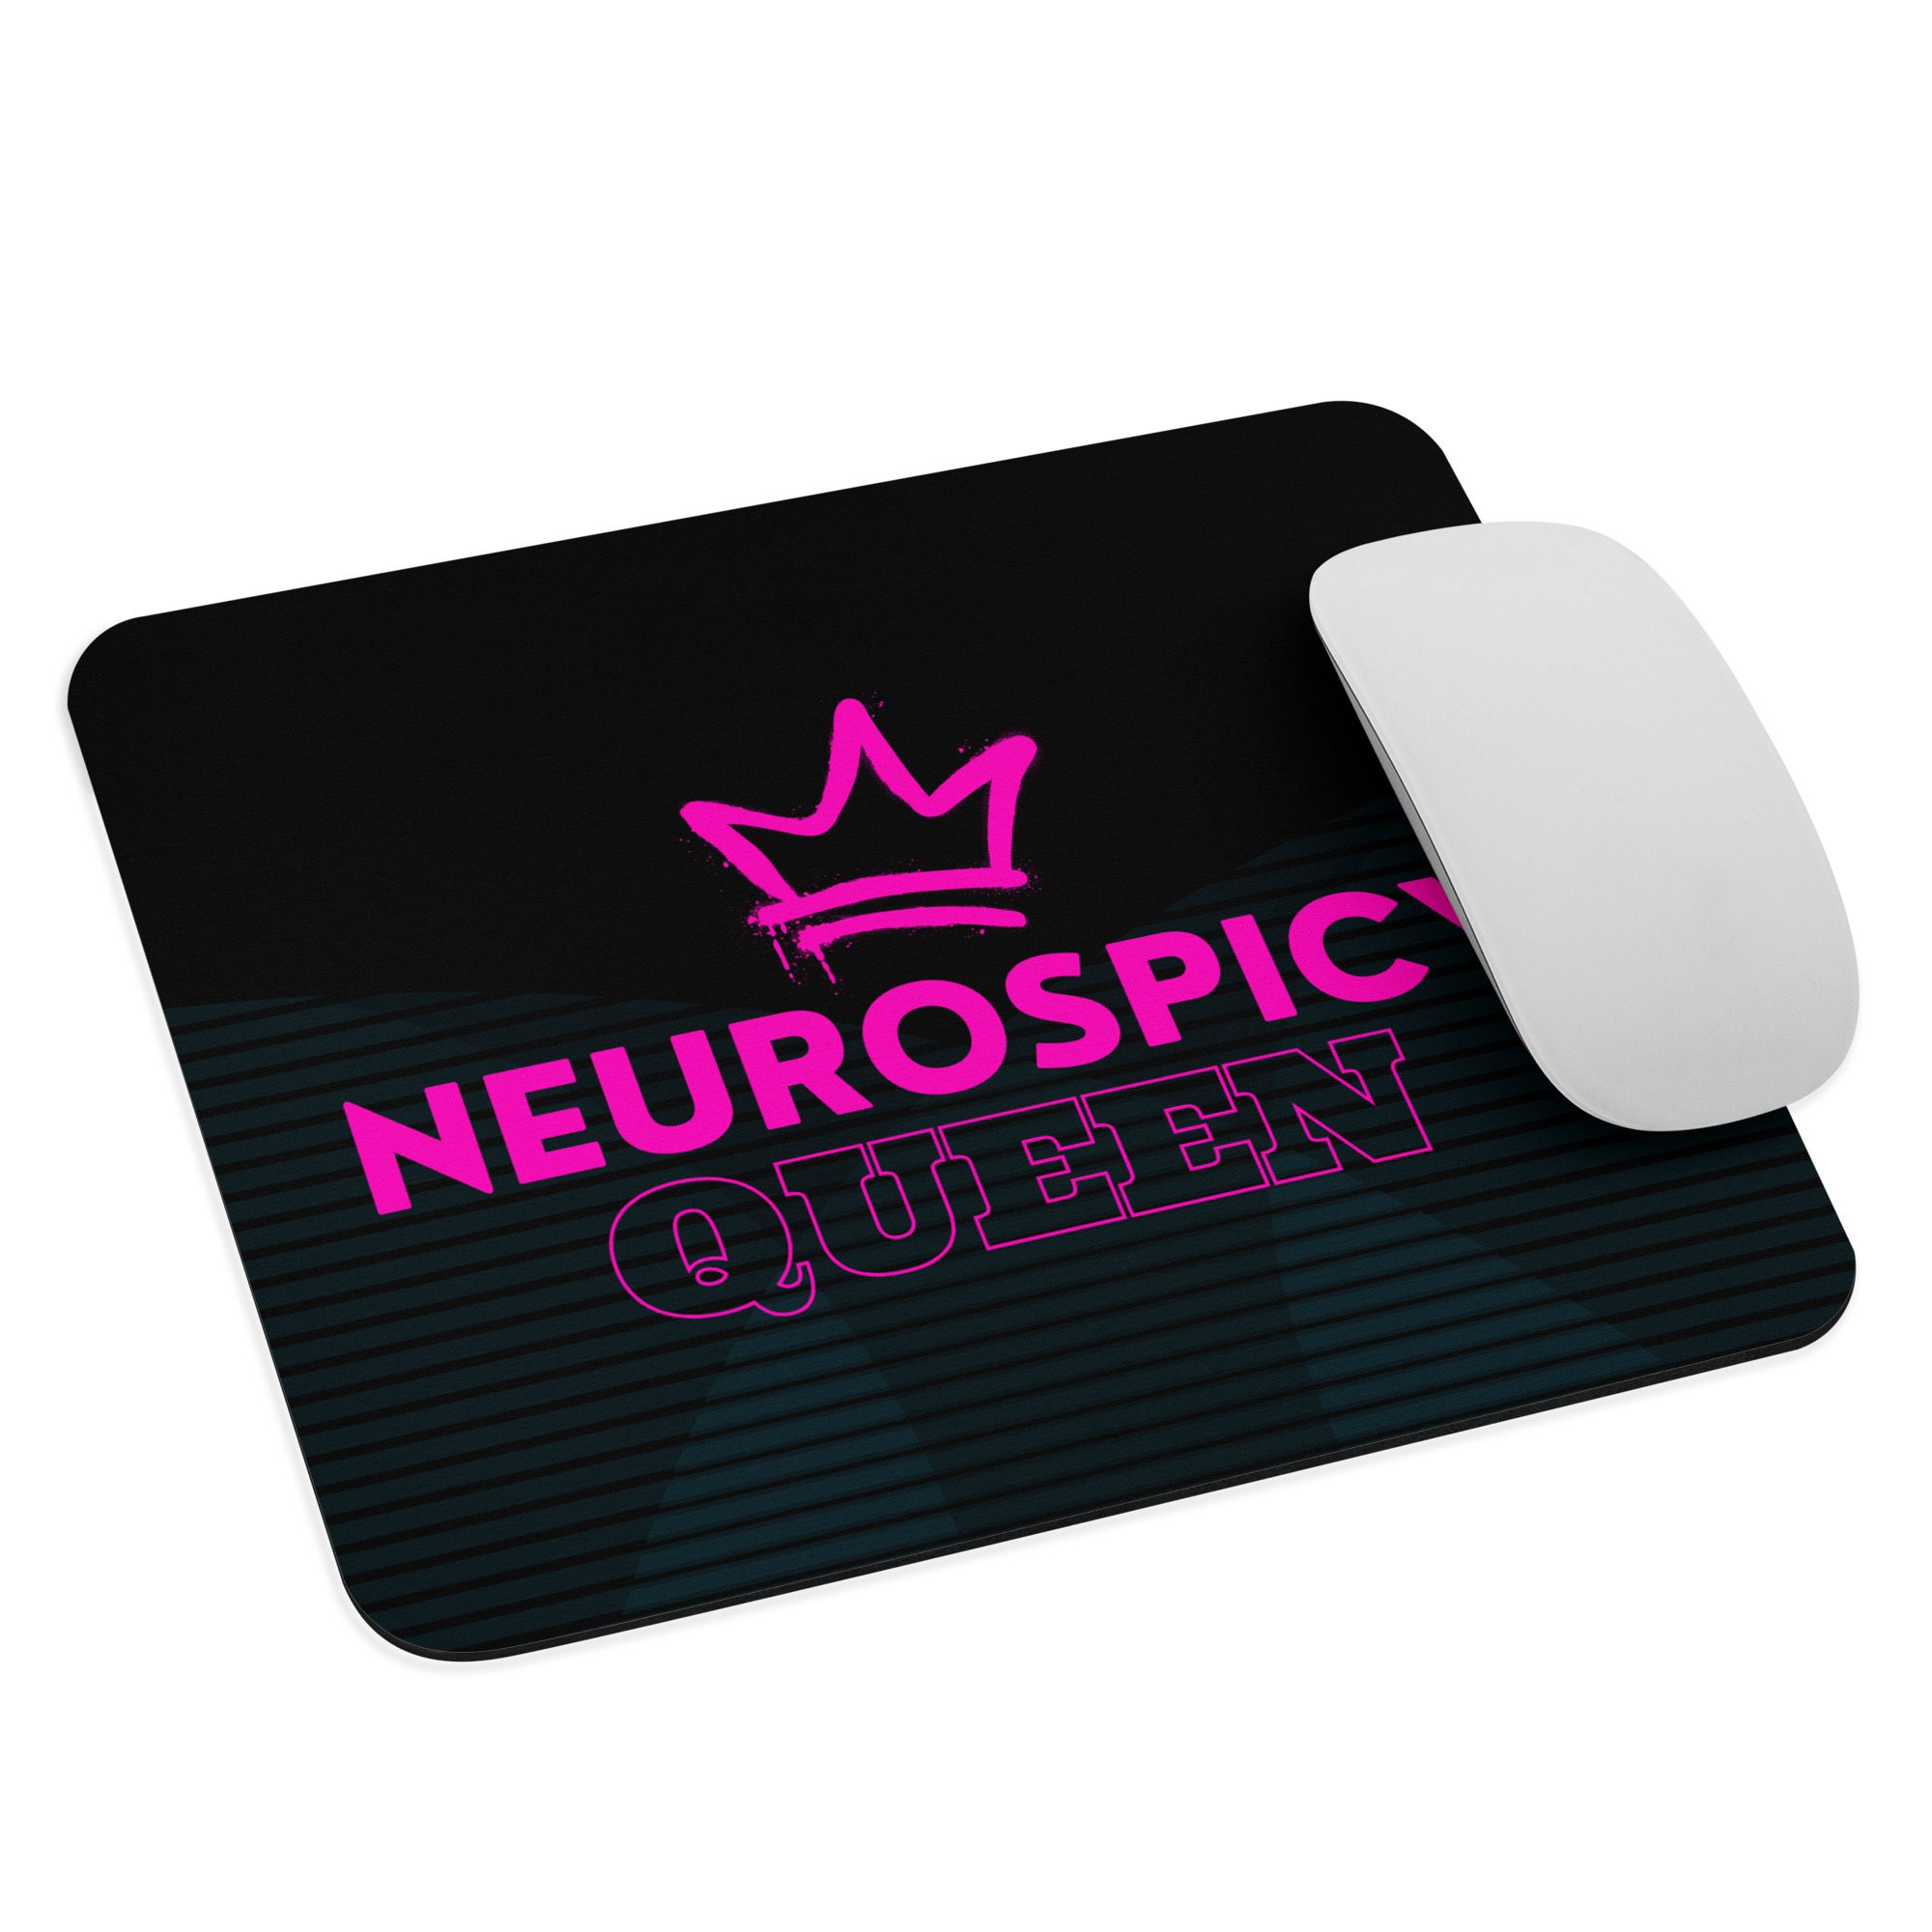 Neurospicy Queen Mouse Pad